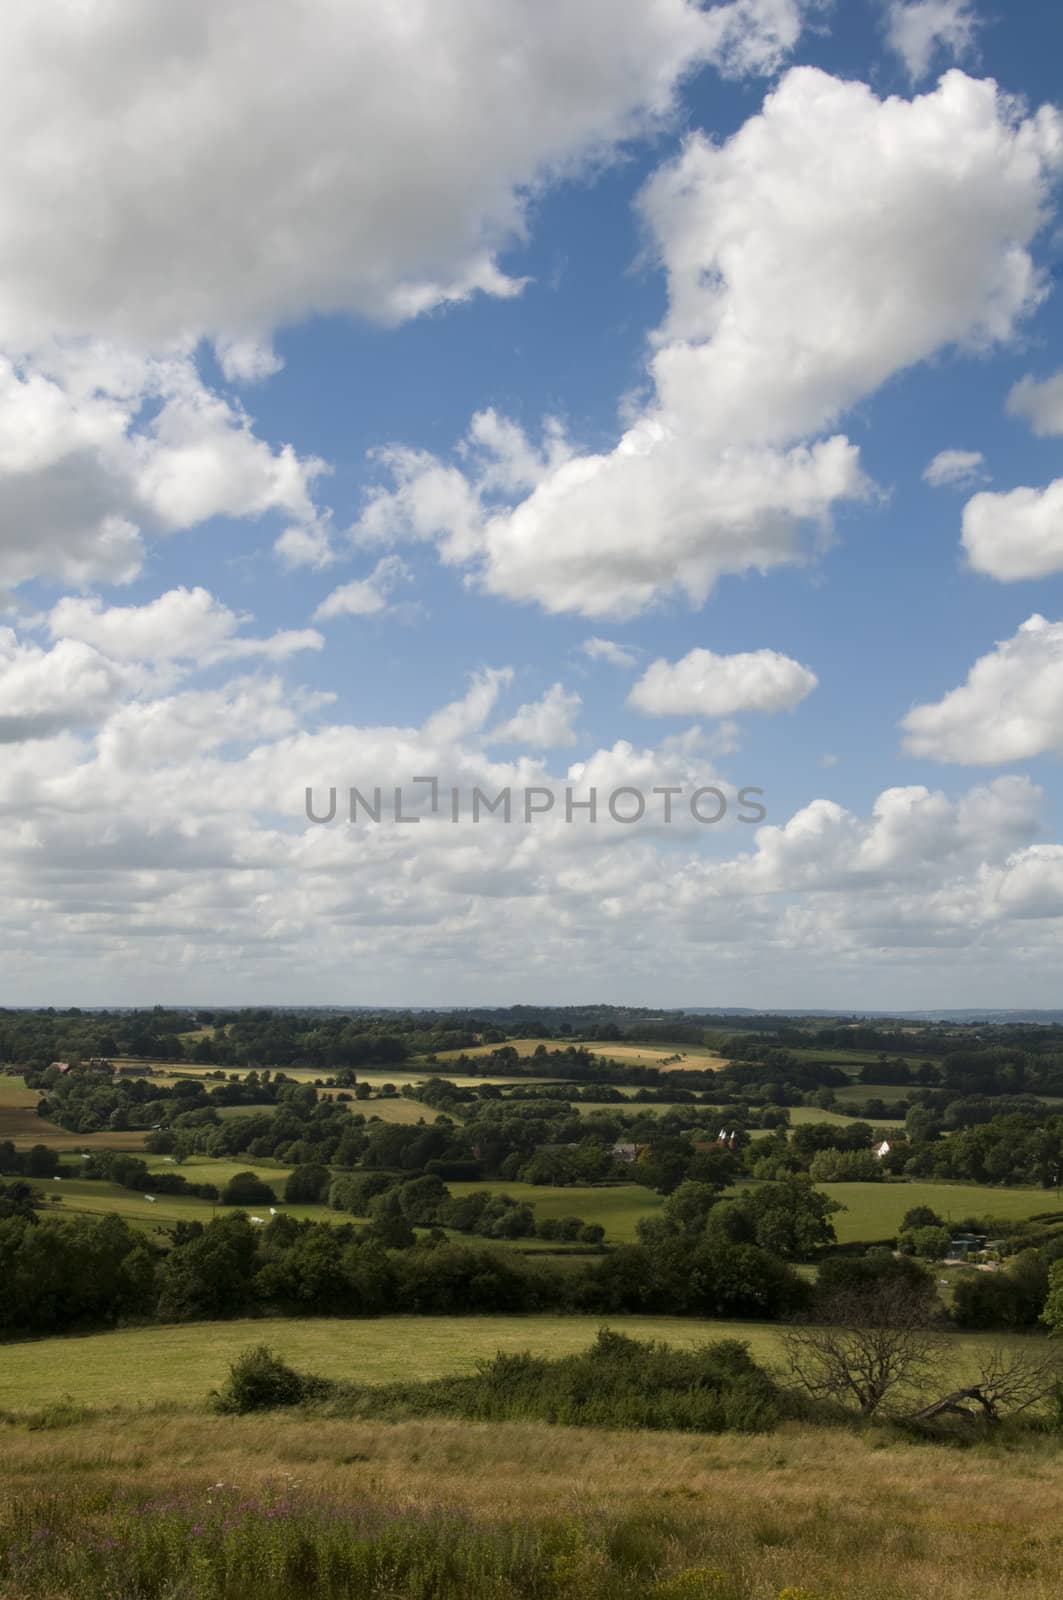 A view of the countryside in summer with a cloudy sky